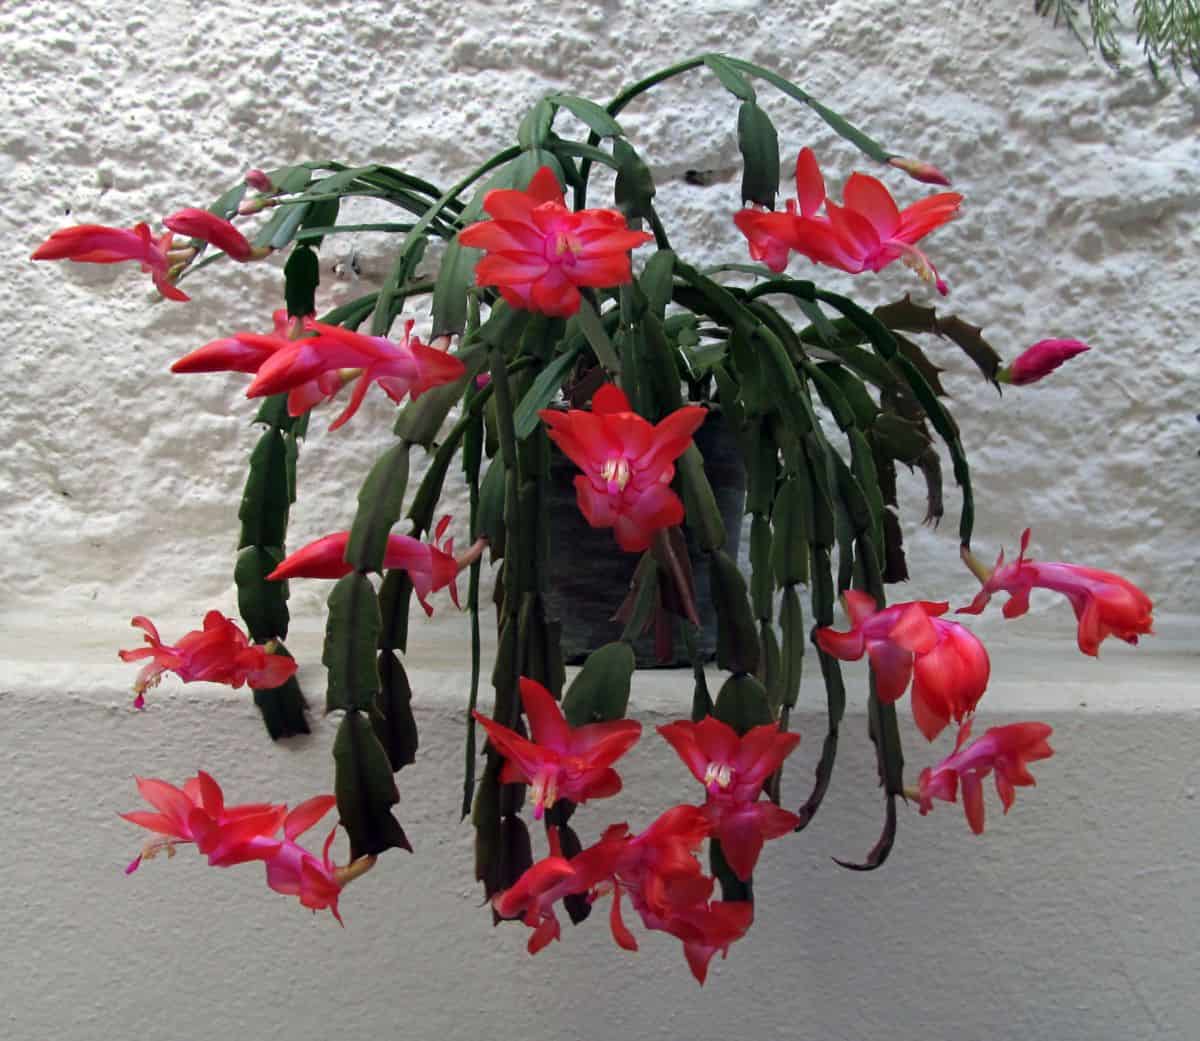 Blooming christmas cactus in a pot.